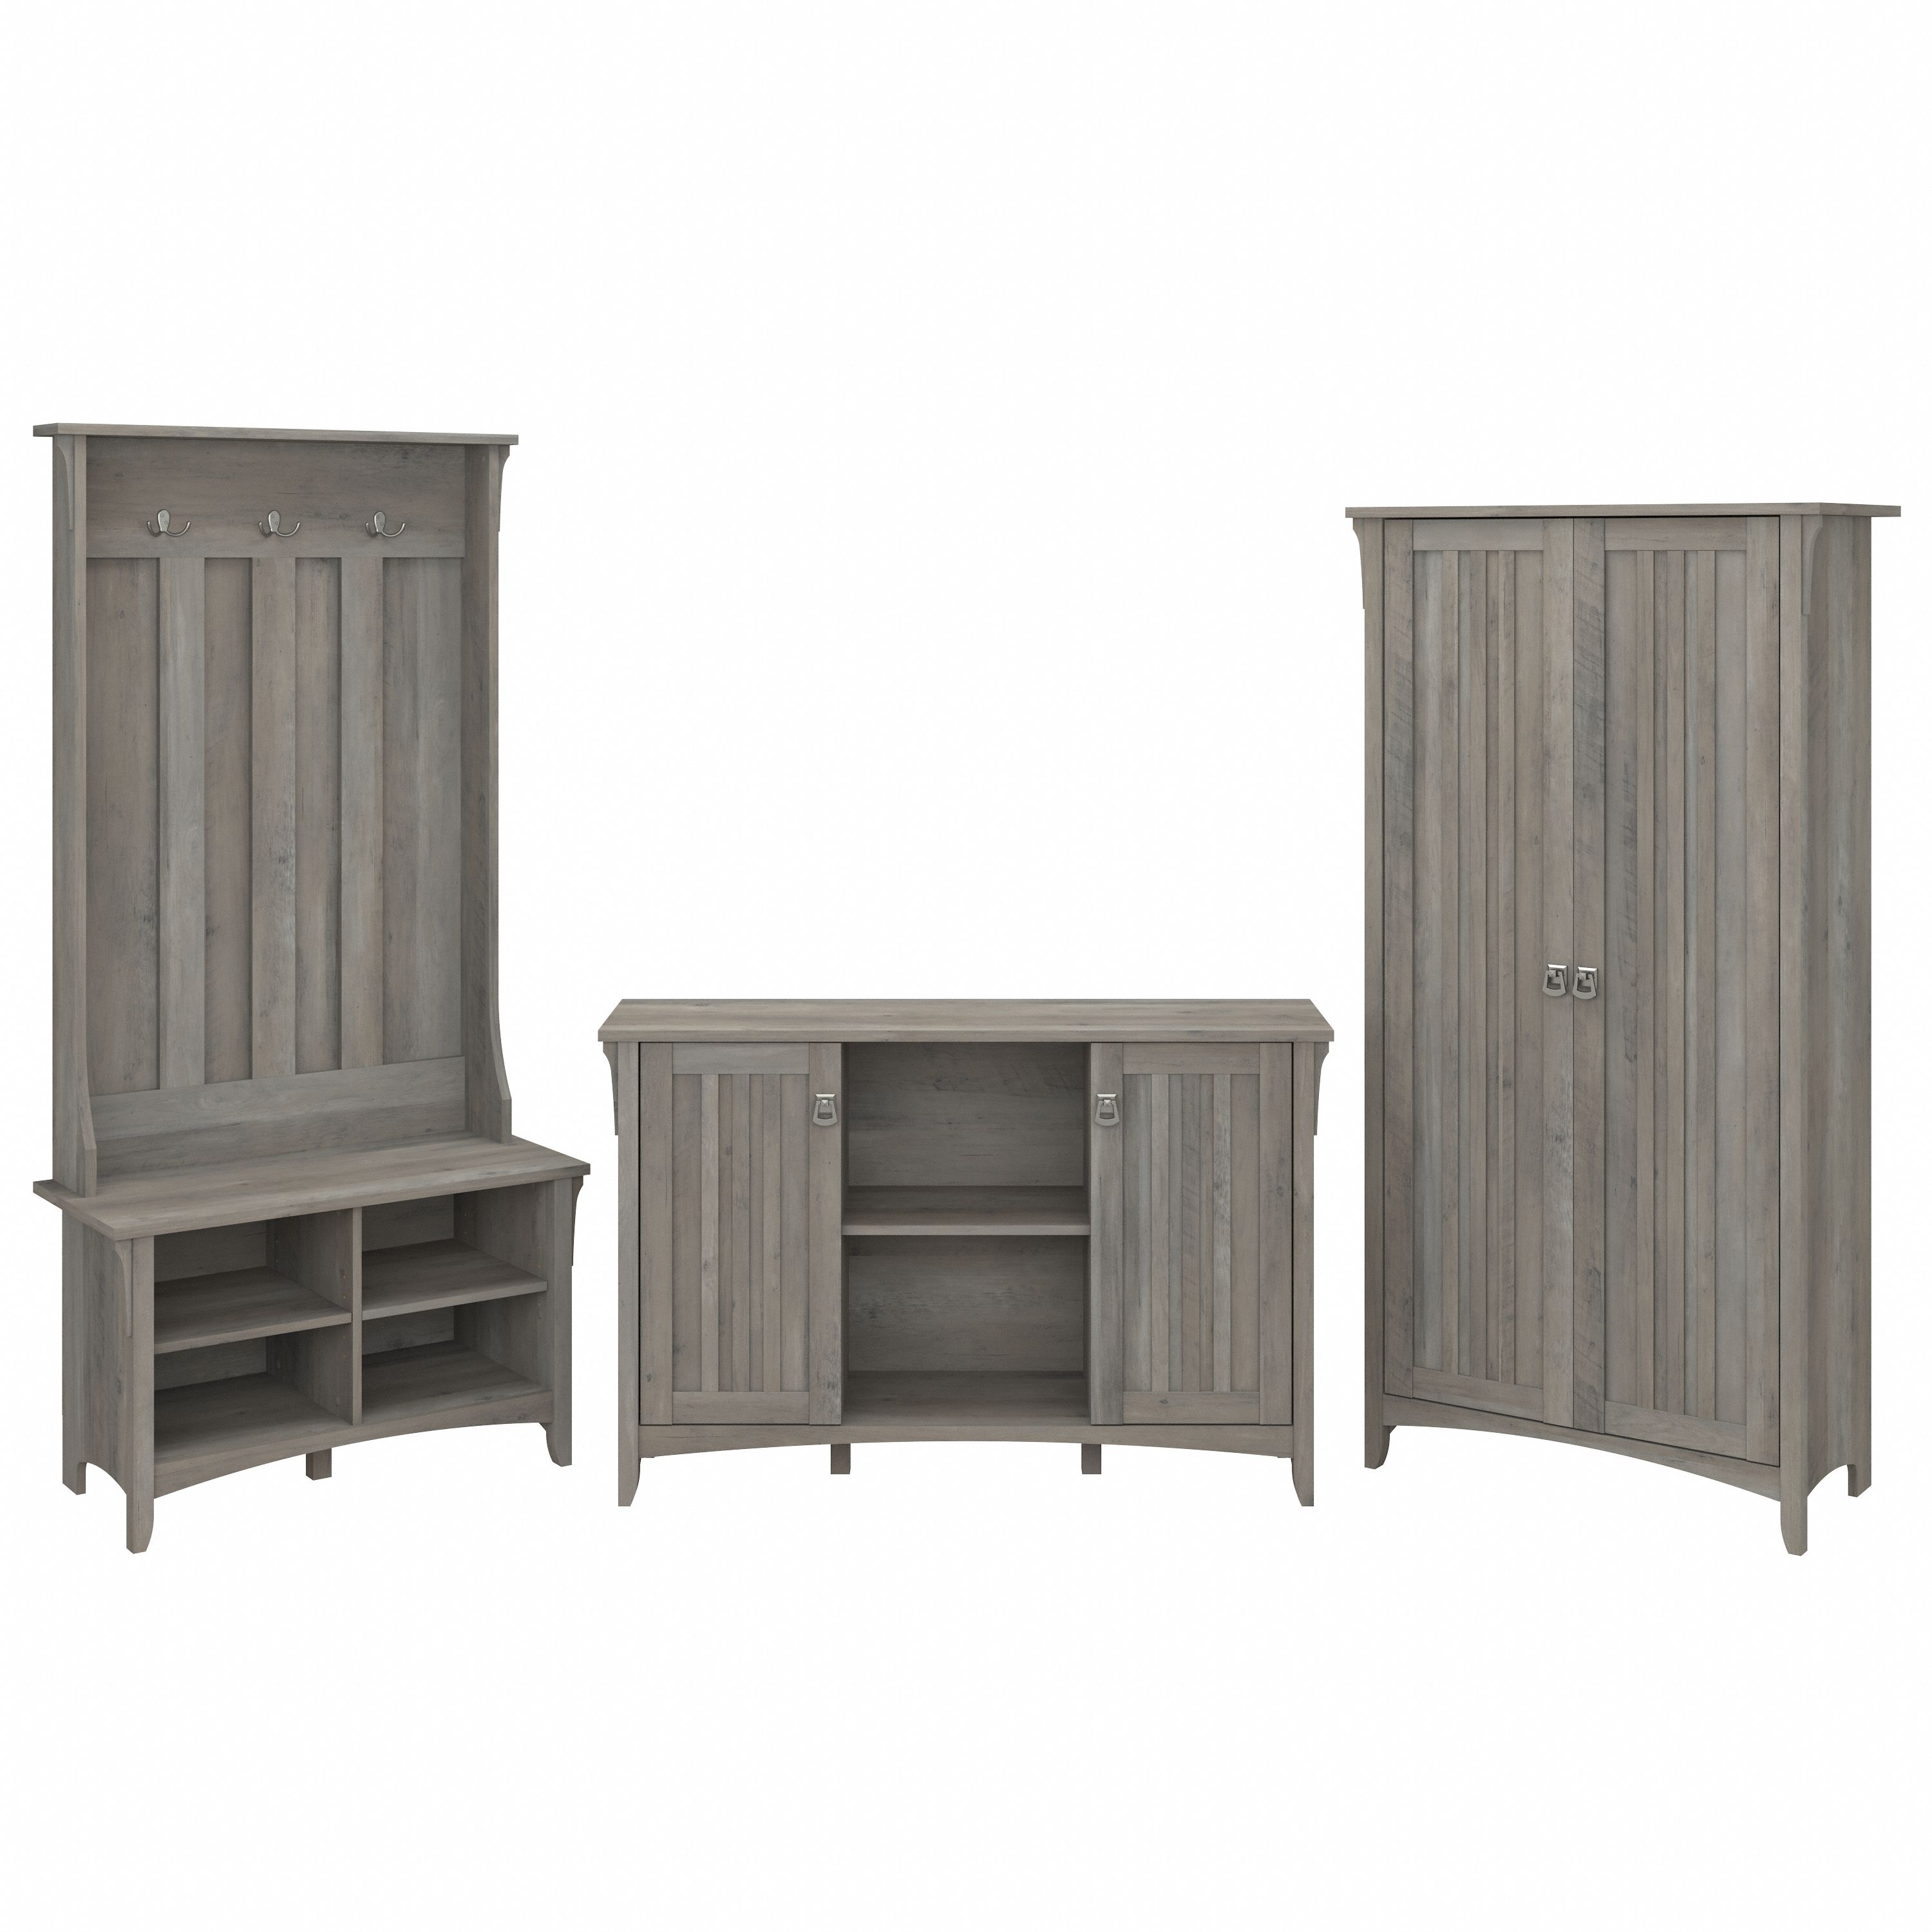 Shop Bush Furniture Salinas Entryway Storage Set with Hall Tree, Shoe Bench and Accent Cabinets 02 SAL016DG #color_driftwood gray